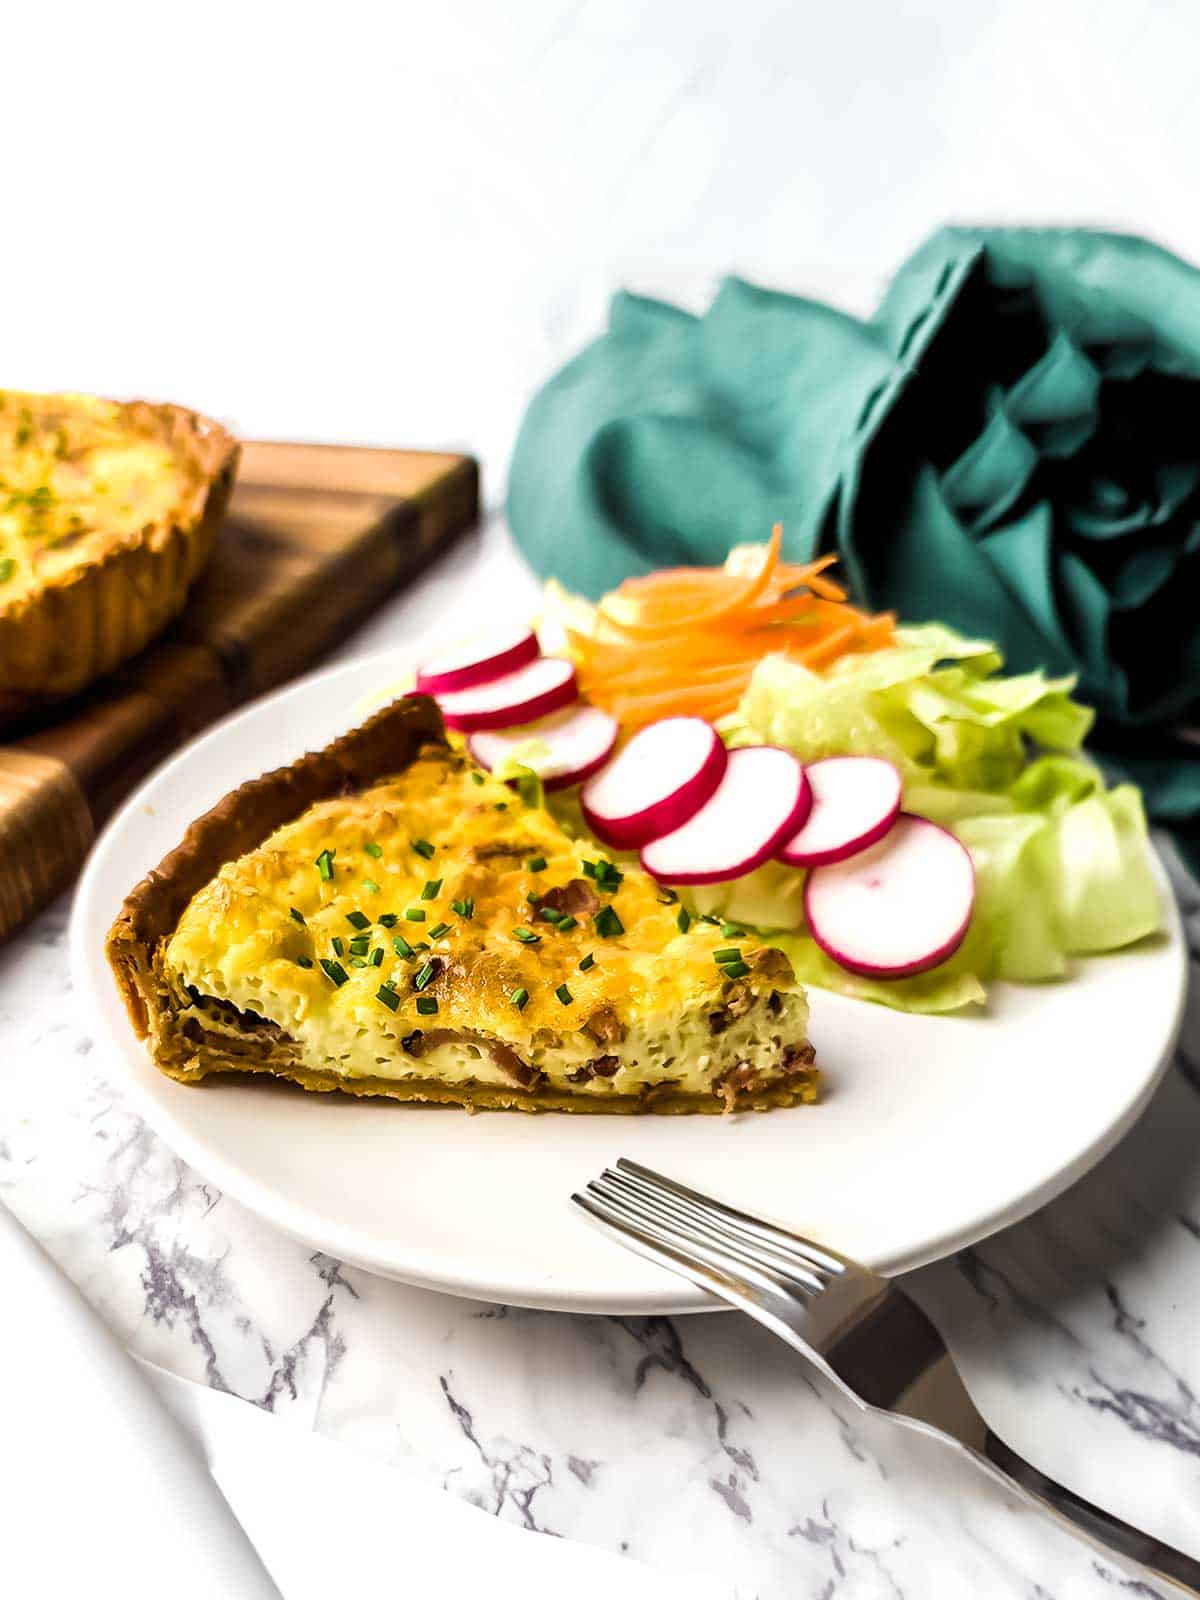 Quiche Lorraine with a salad on a plate.